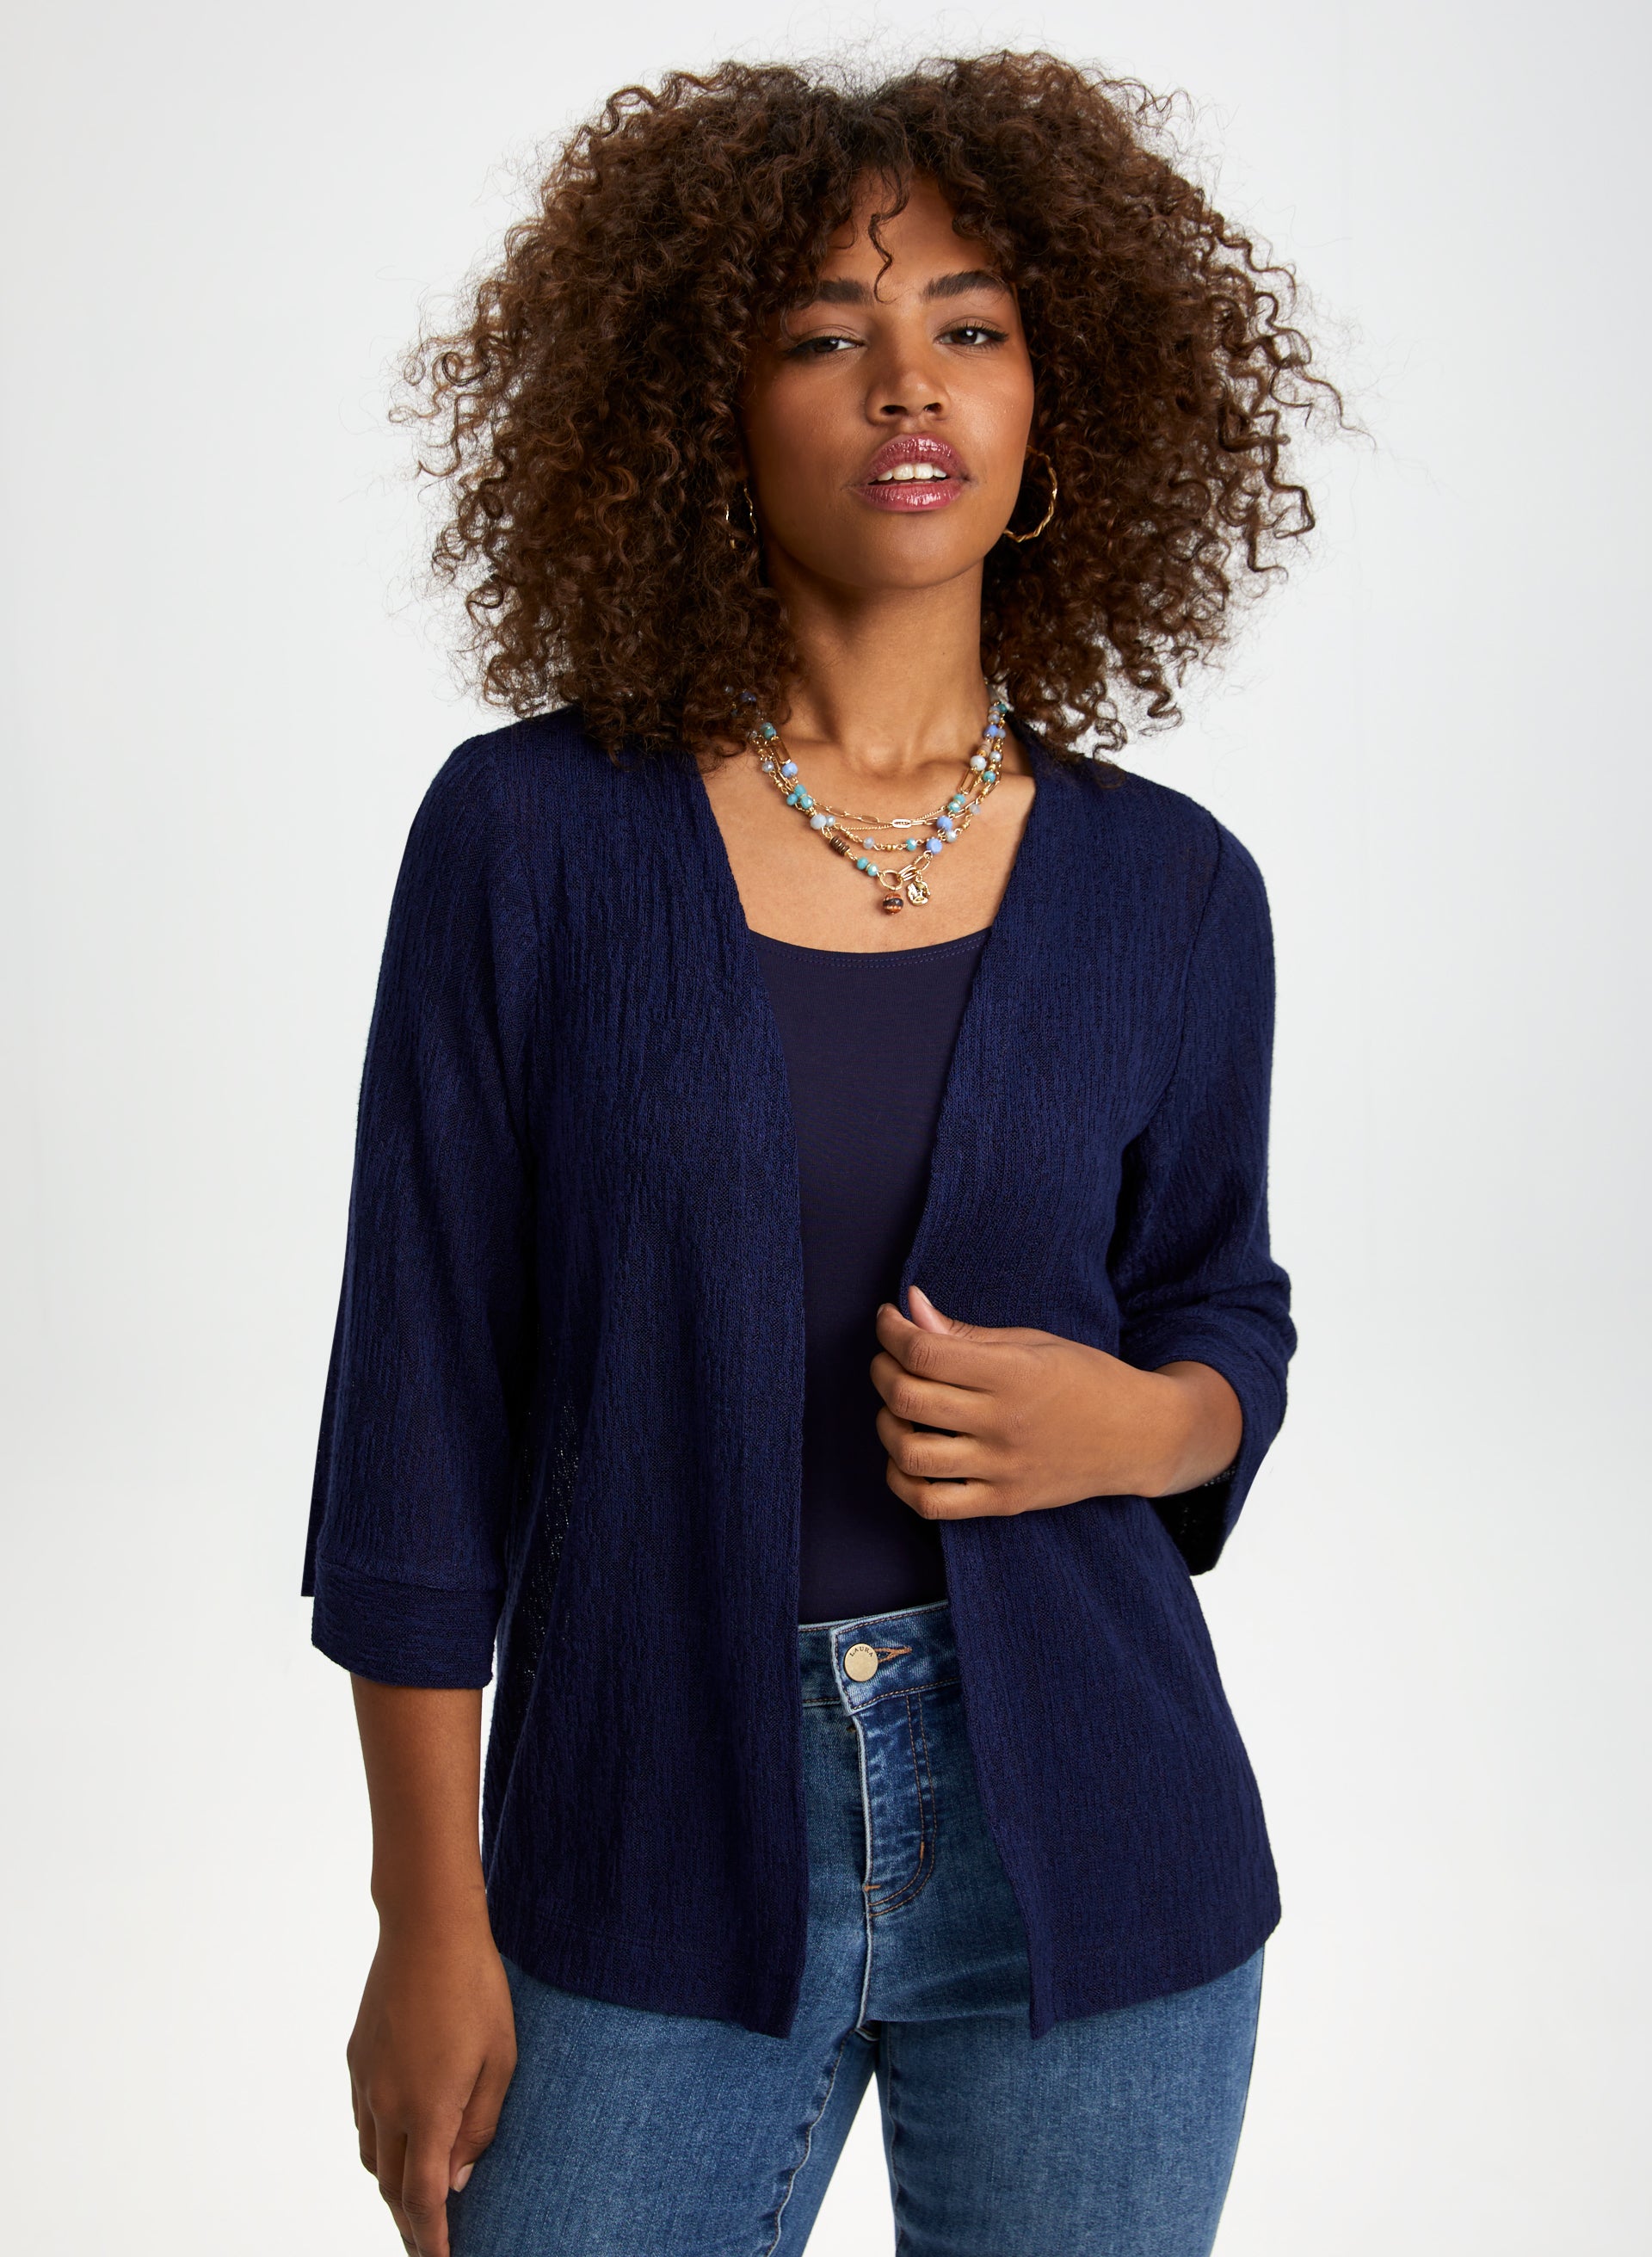 3/4 Sleeve Knit Cover-Up